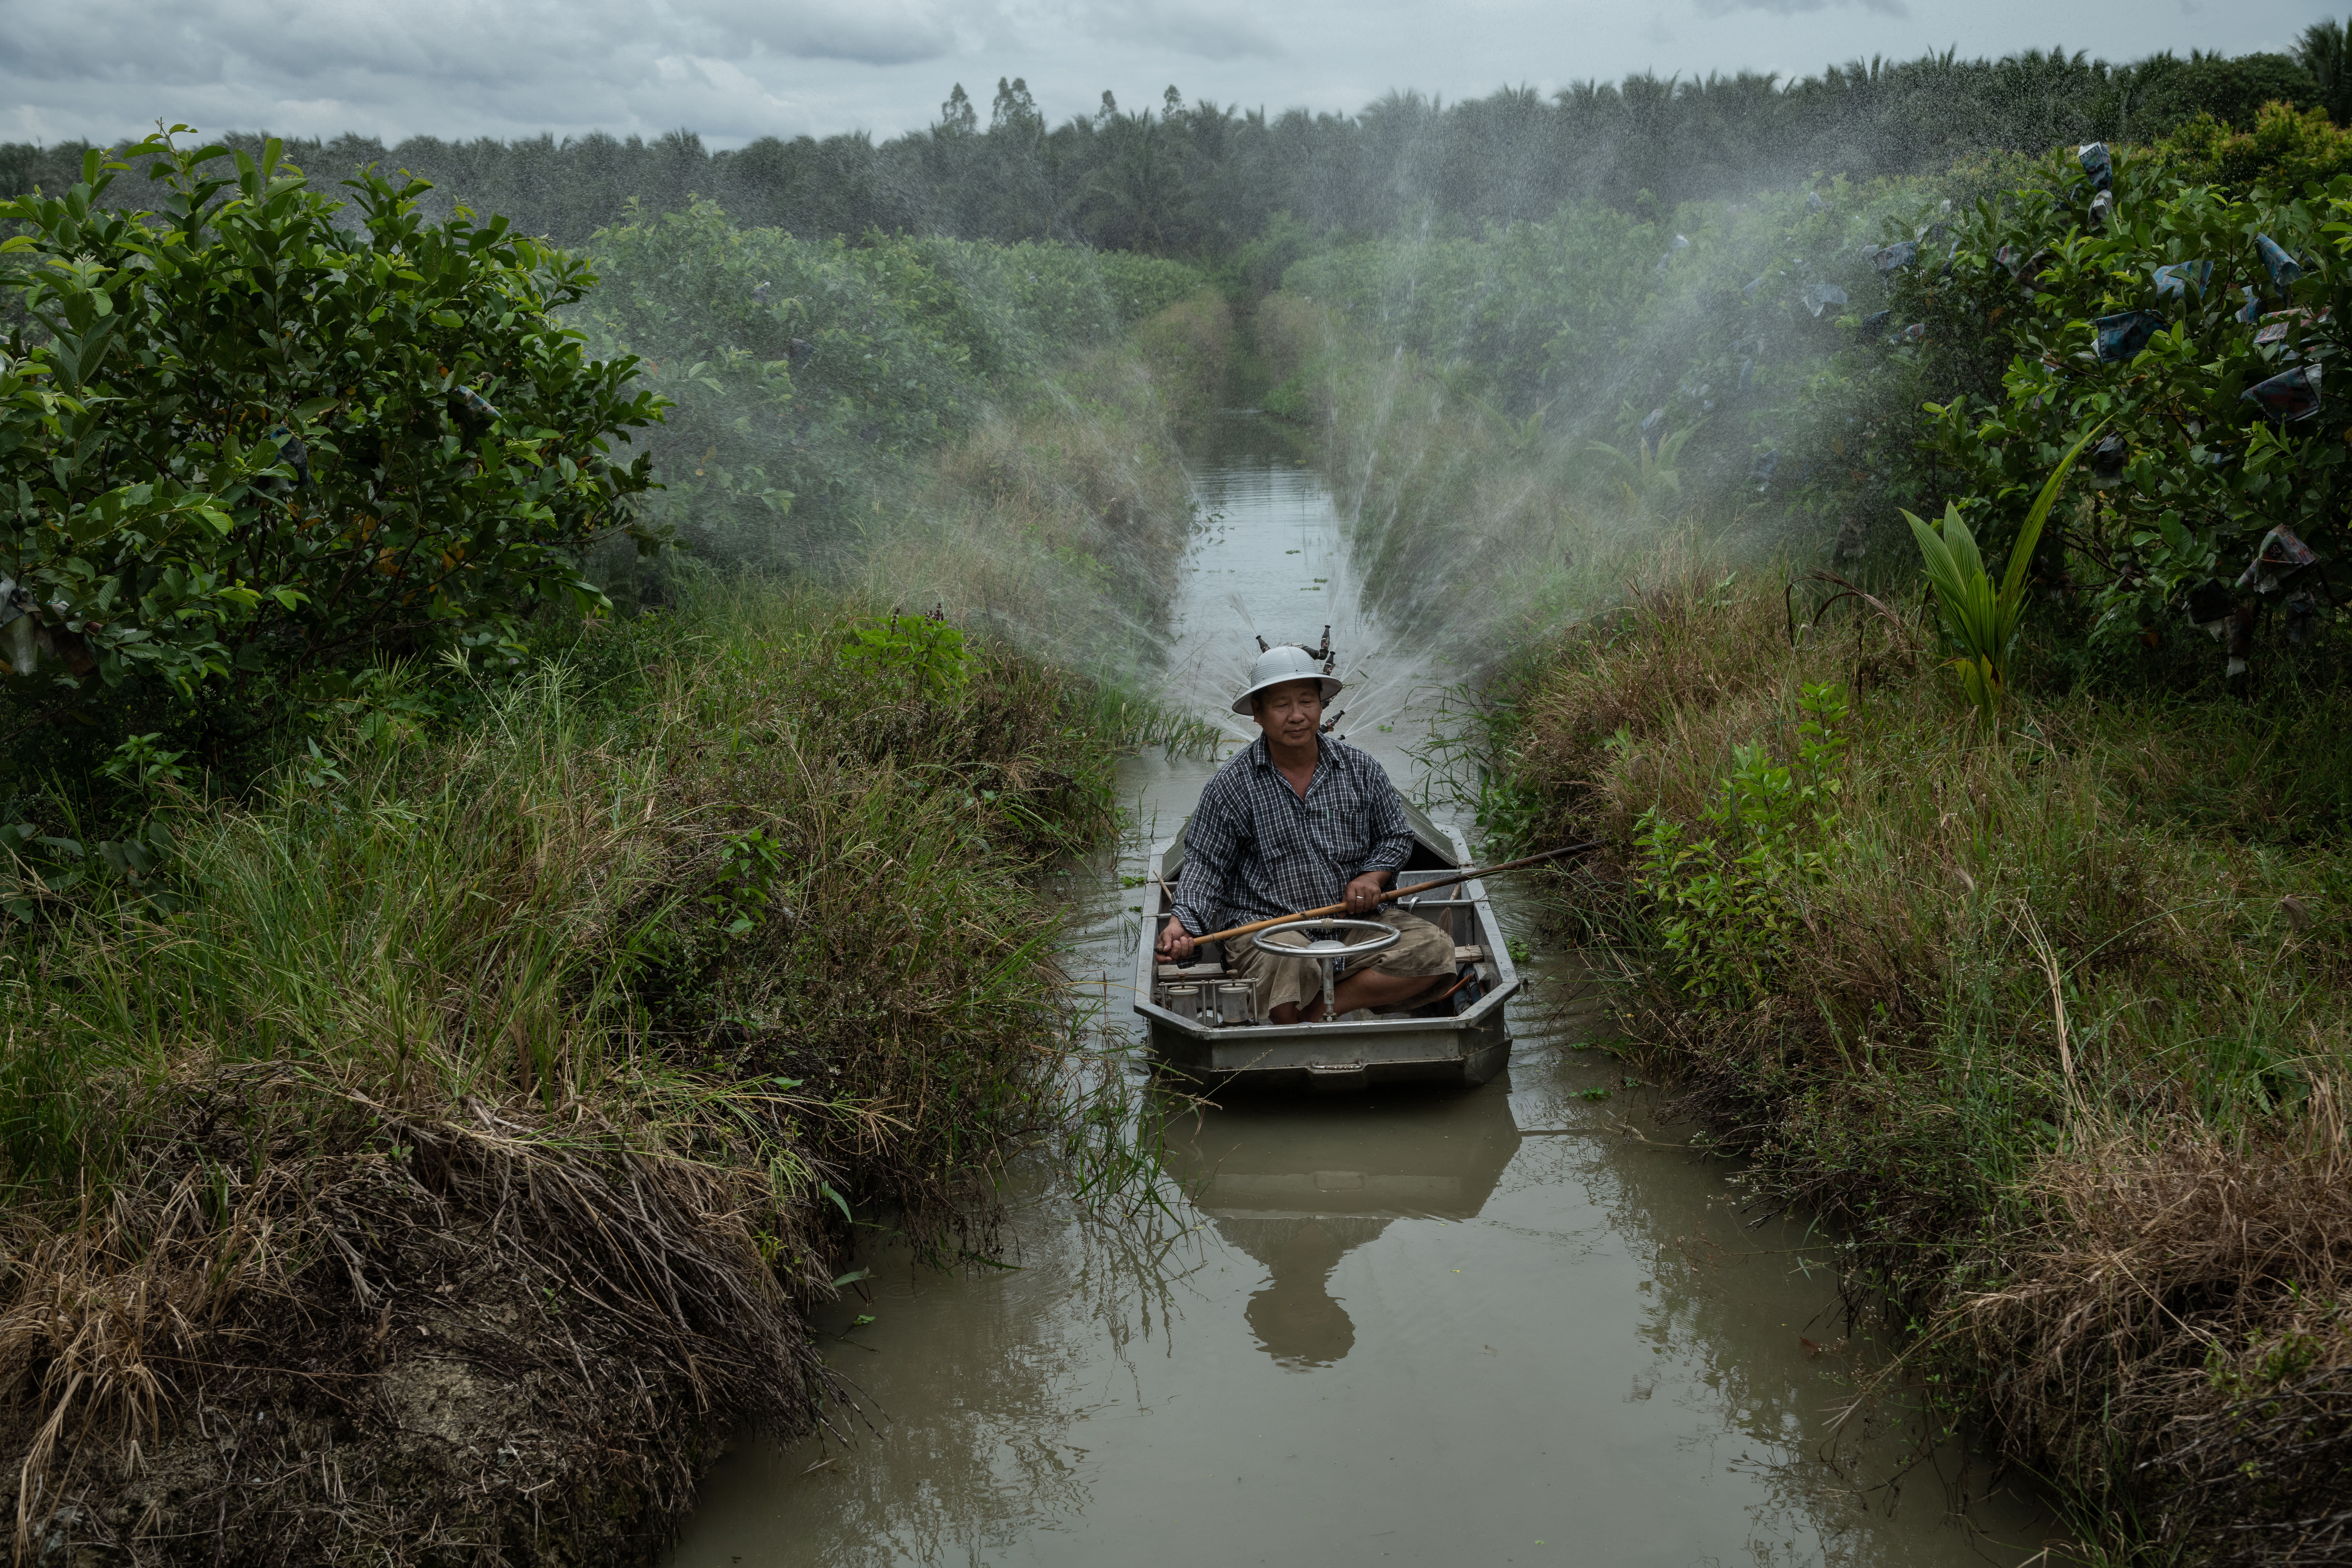 A farmer is watering his vegetables on a farm in Ratchaburi, Thailand. The farmer travels the canal spraying a mix of pesticides and fertilizers.  Photo by Arun Roysri